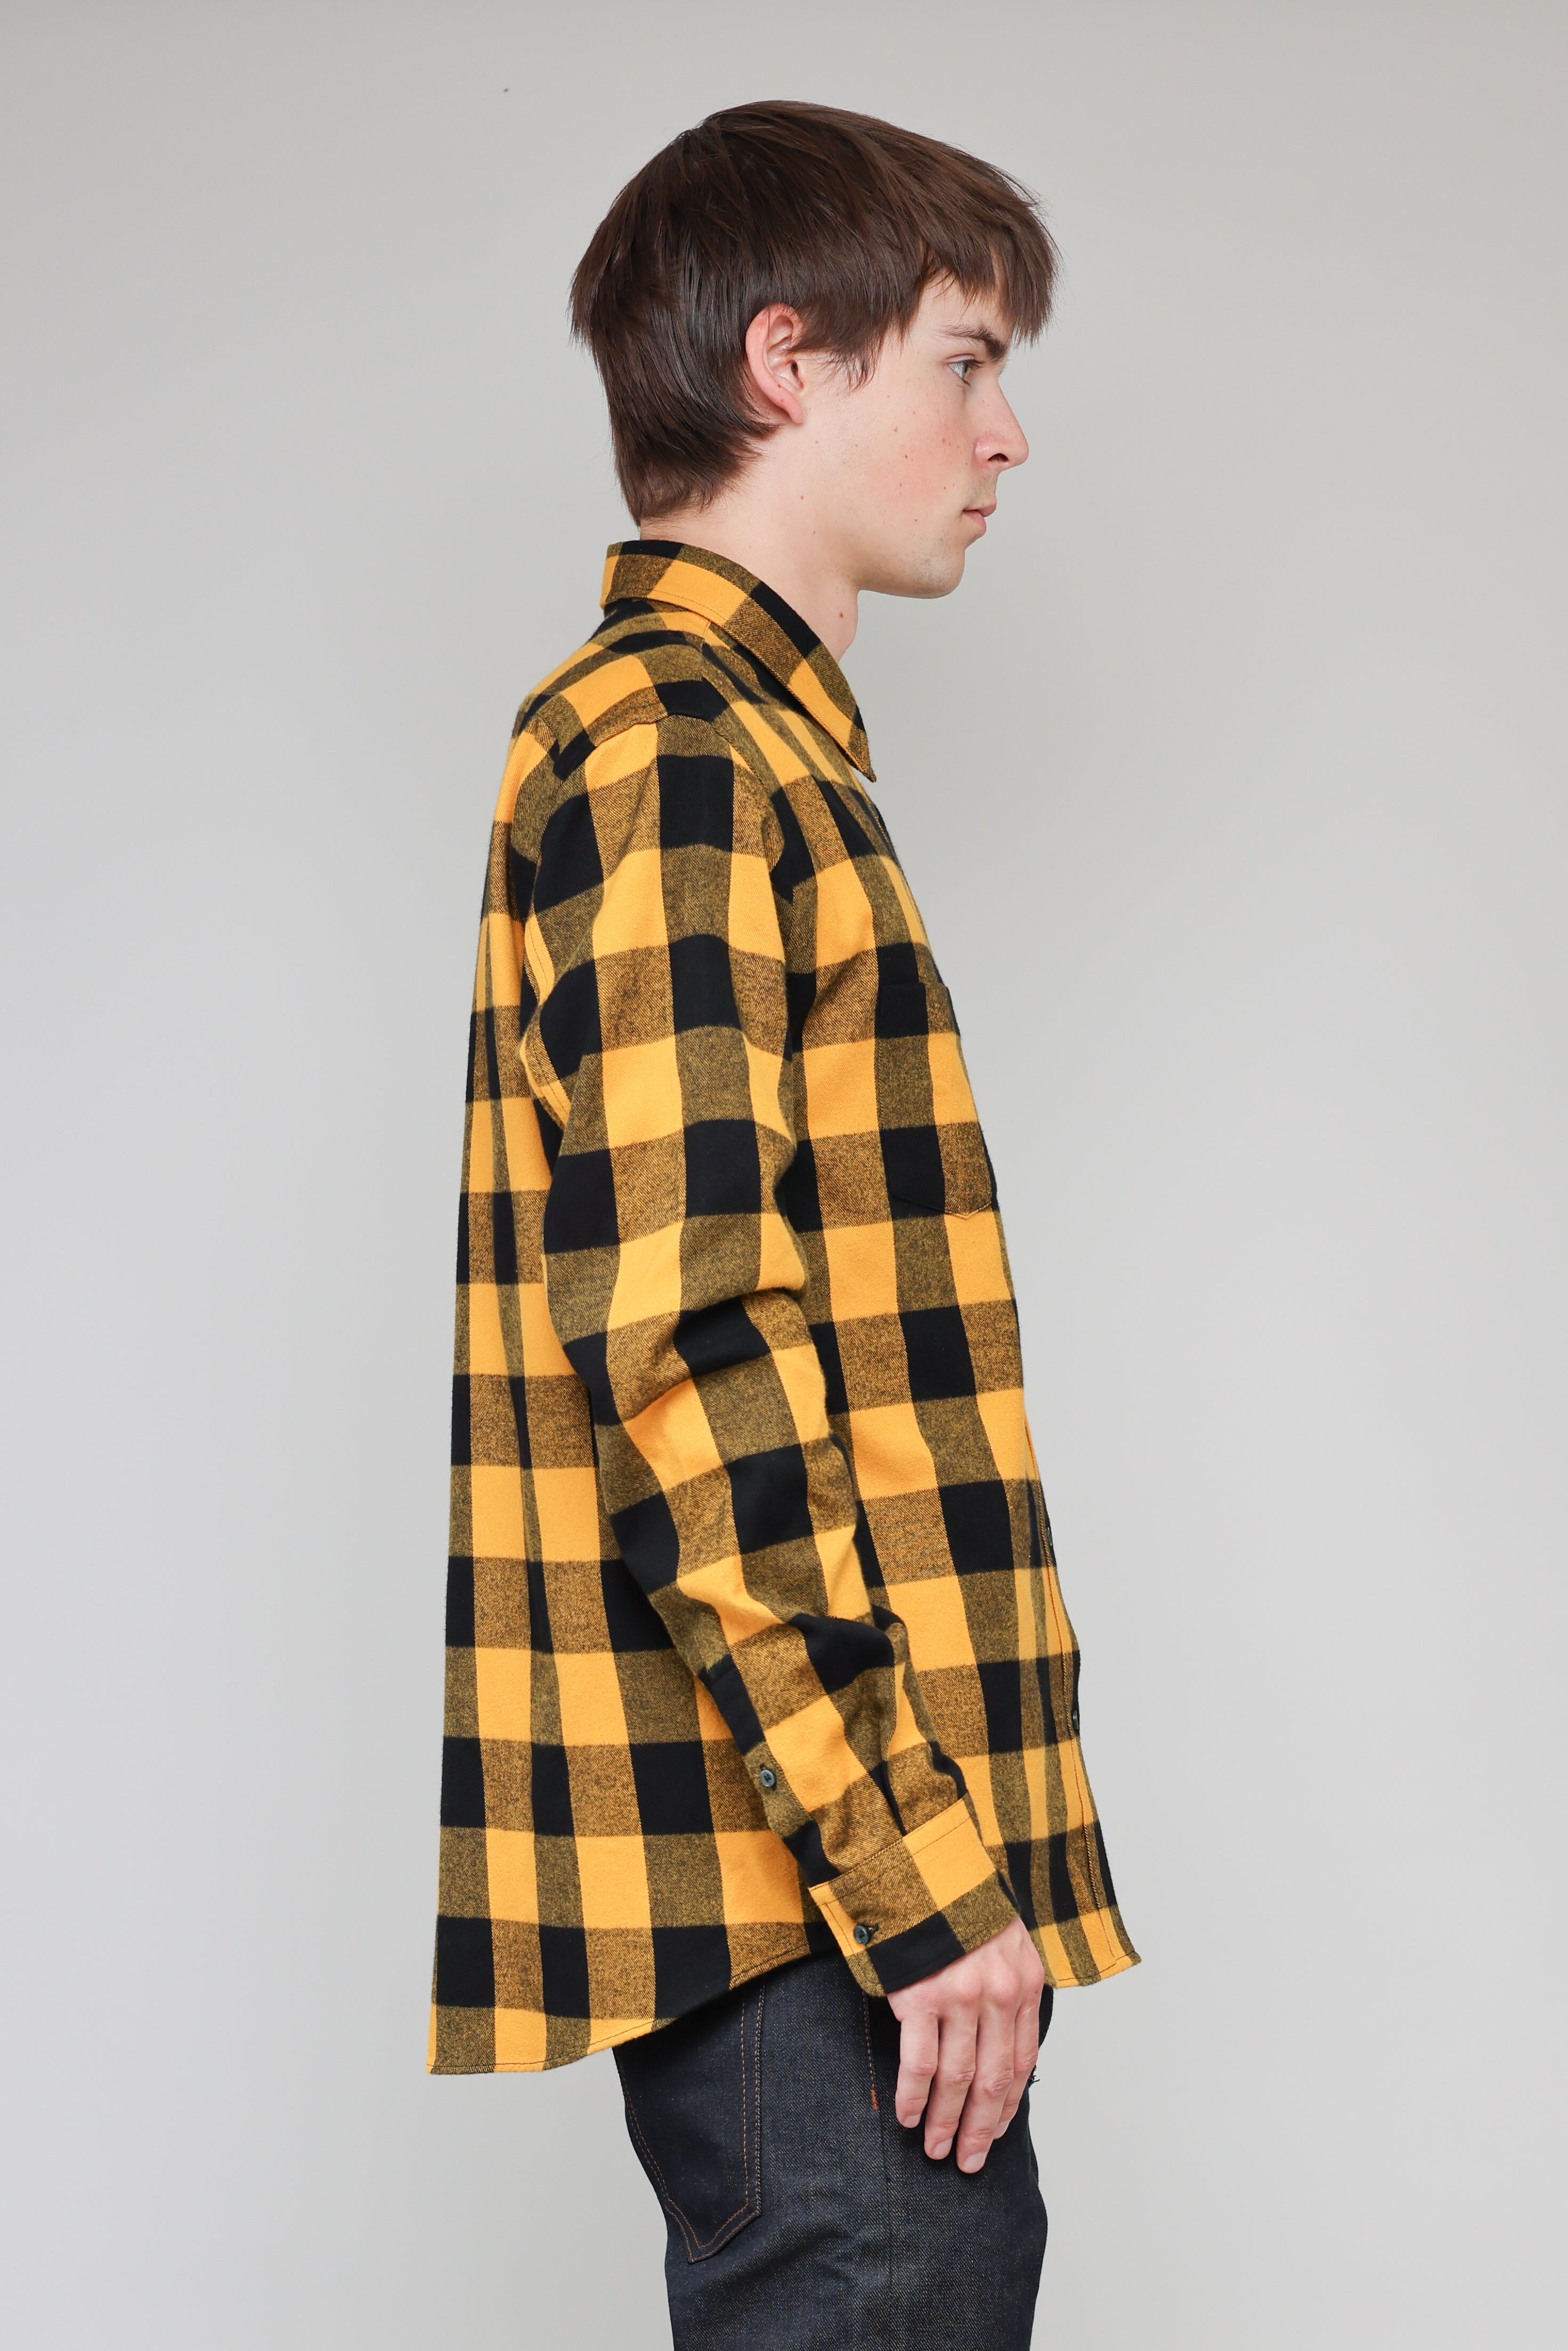 Japanese Brushed Buffalo Plaid in Yellow and Black 03